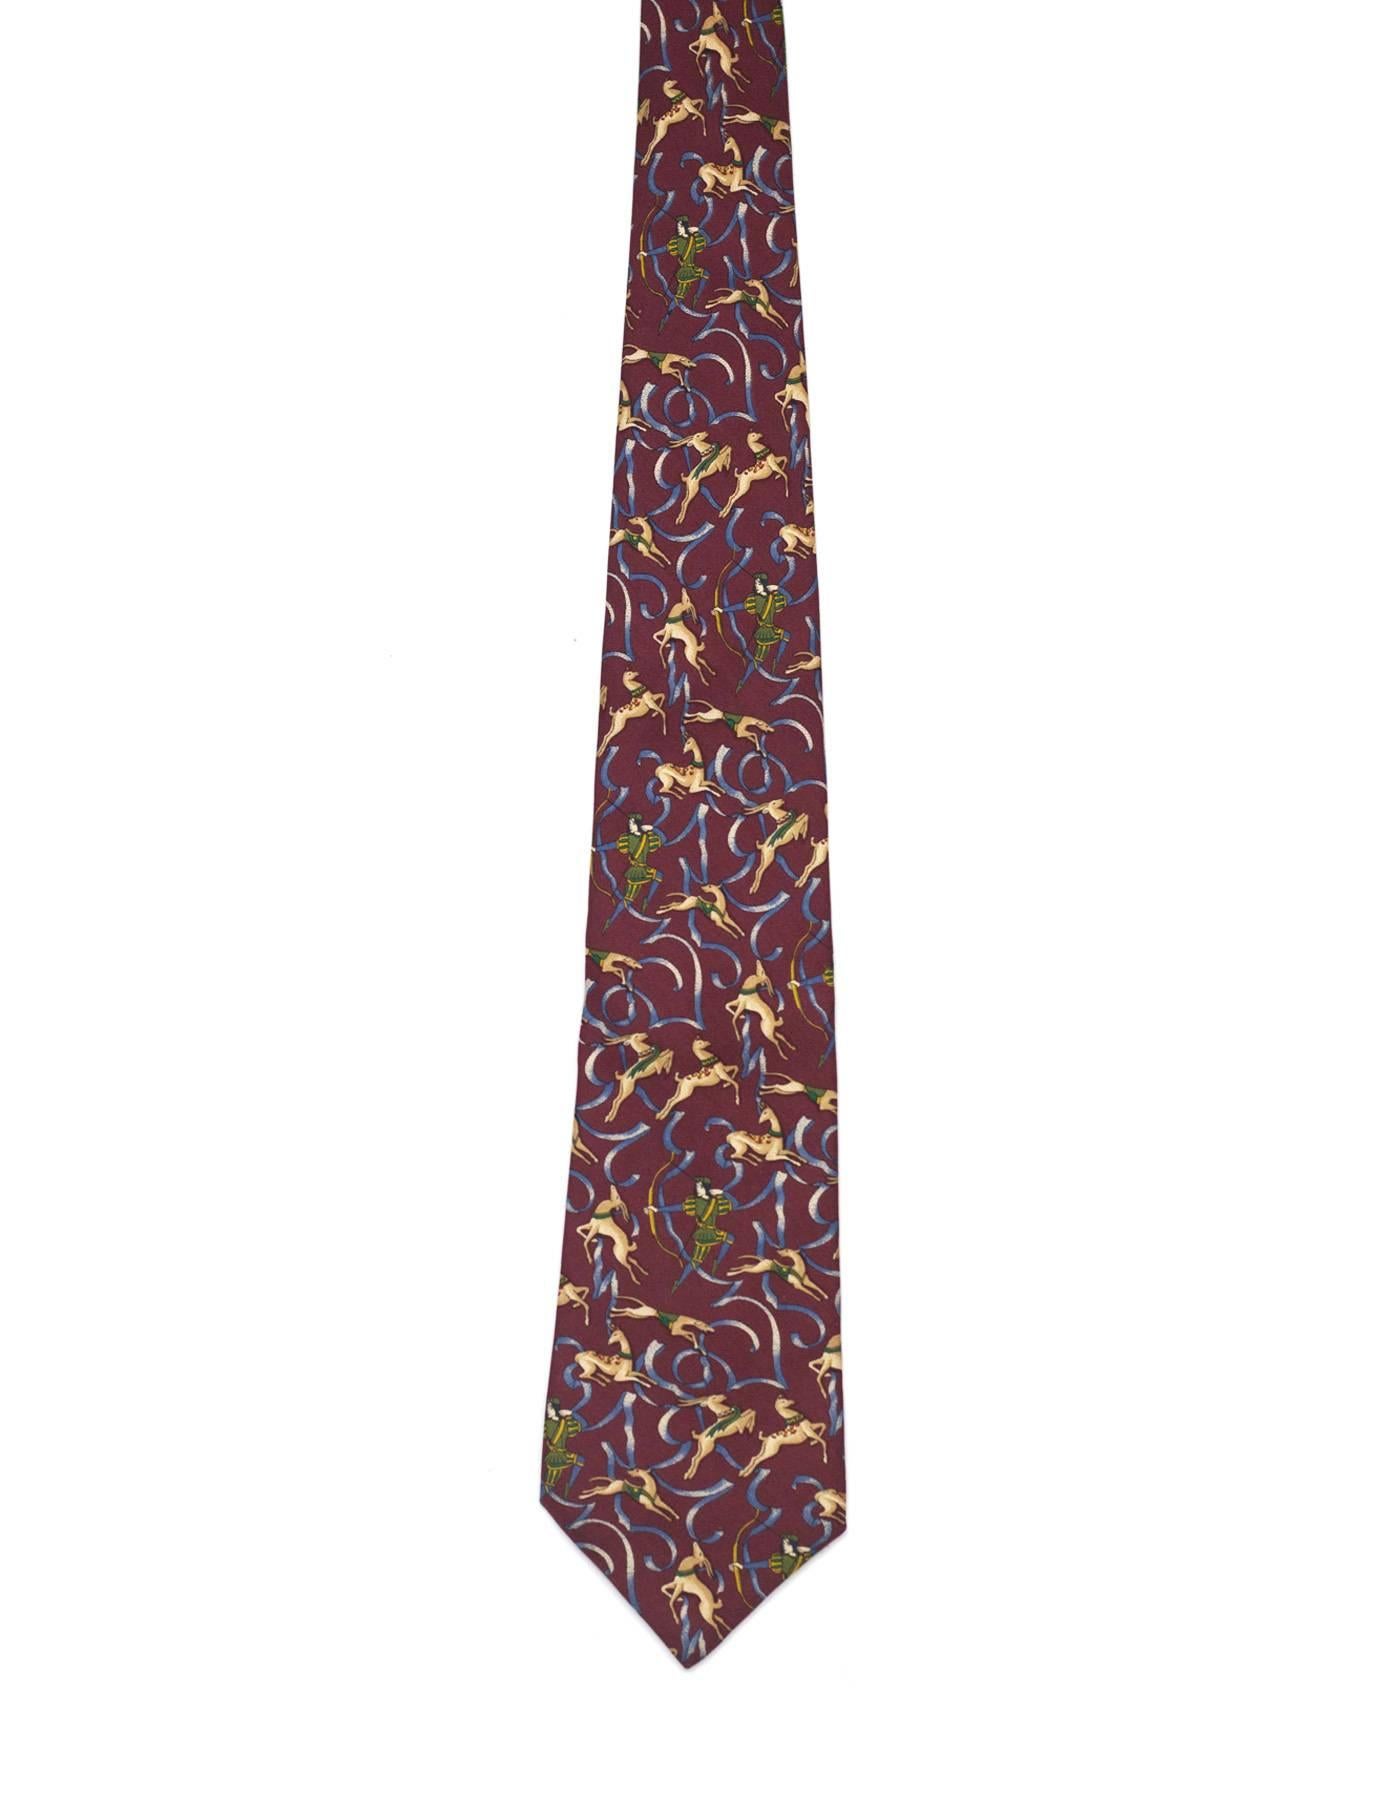 Salvatore Ferragamo Burgundy Deer Hunting Print Silk Tie
Features man with bow & arrow, deer and dogs printed throughout
Made In: Italy
Color: Burgundy, beige and green
Composition: 100% silk
Overall Condition: Excellent pre-owned condition